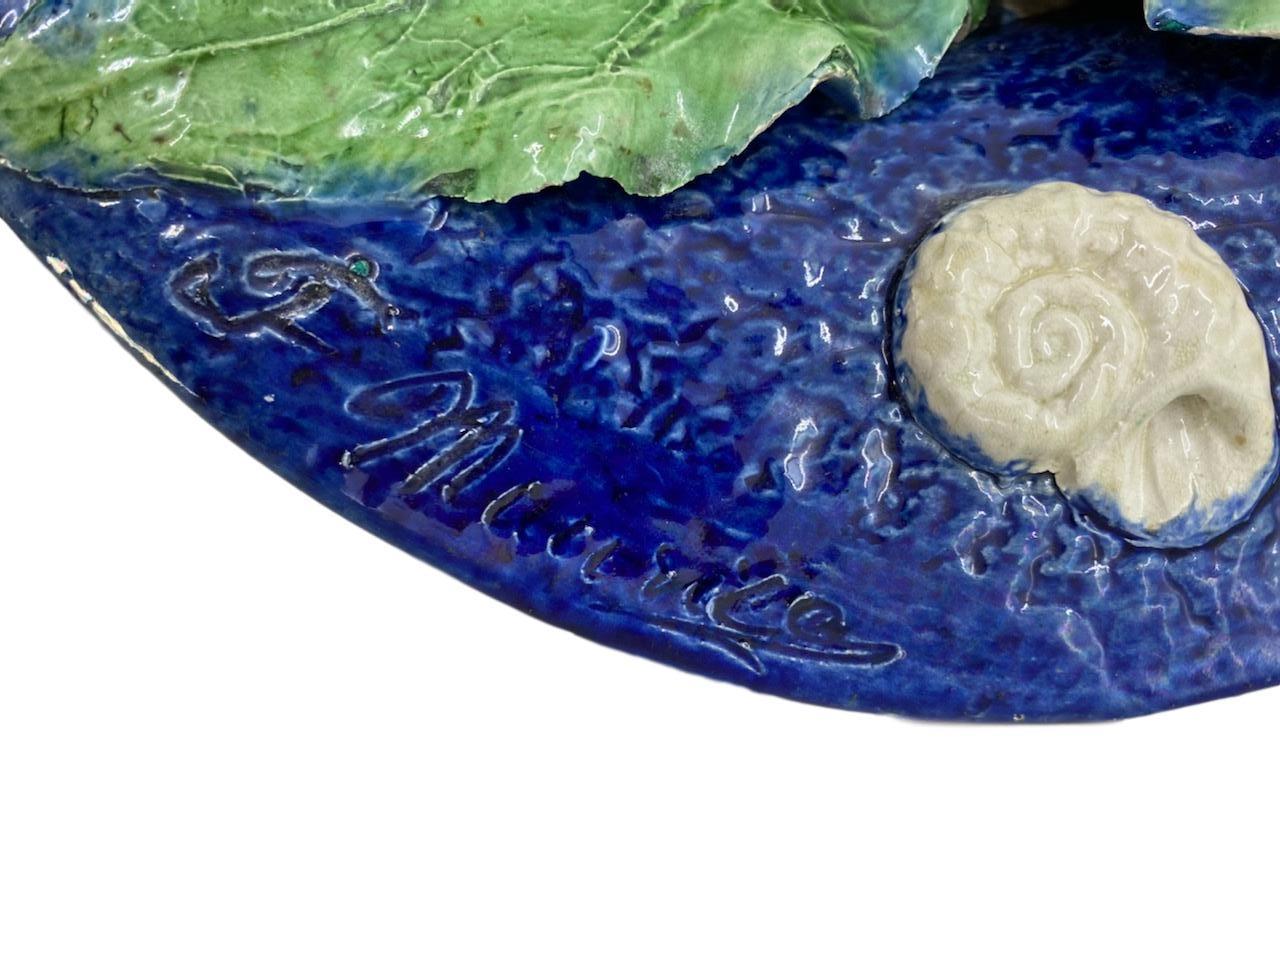 Large Franҫois Maurice Palissy Ware Majolica Trompe L'oeil Fish Plaque, 1880 For Sale 3